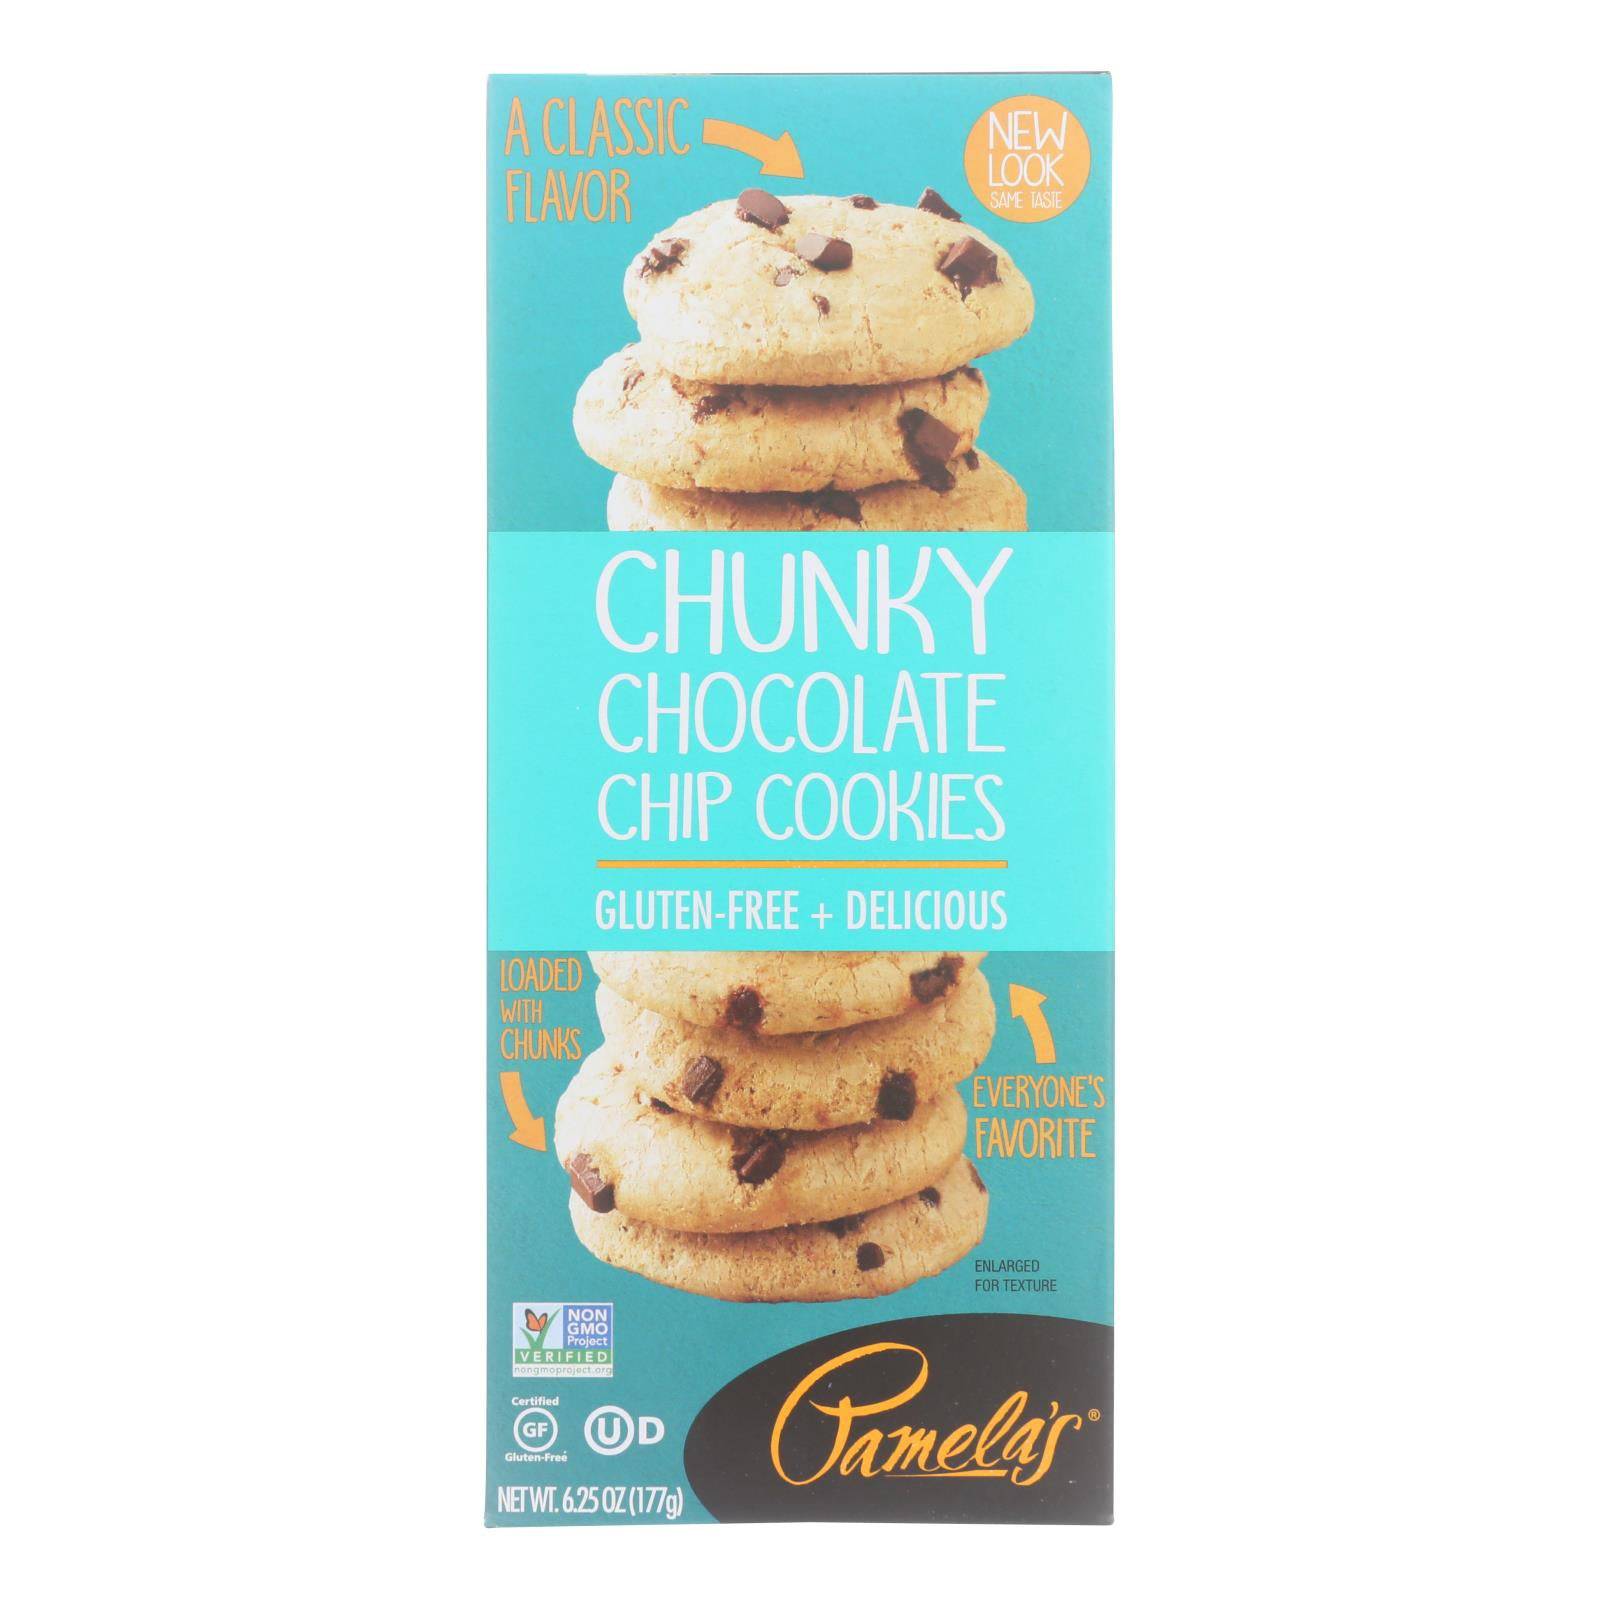 Pamela's Products - Cookies - Chunky Chocolate Chip - Gluten-free - Case Of 6 - 6.25 Oz. | OnlyNaturals.us